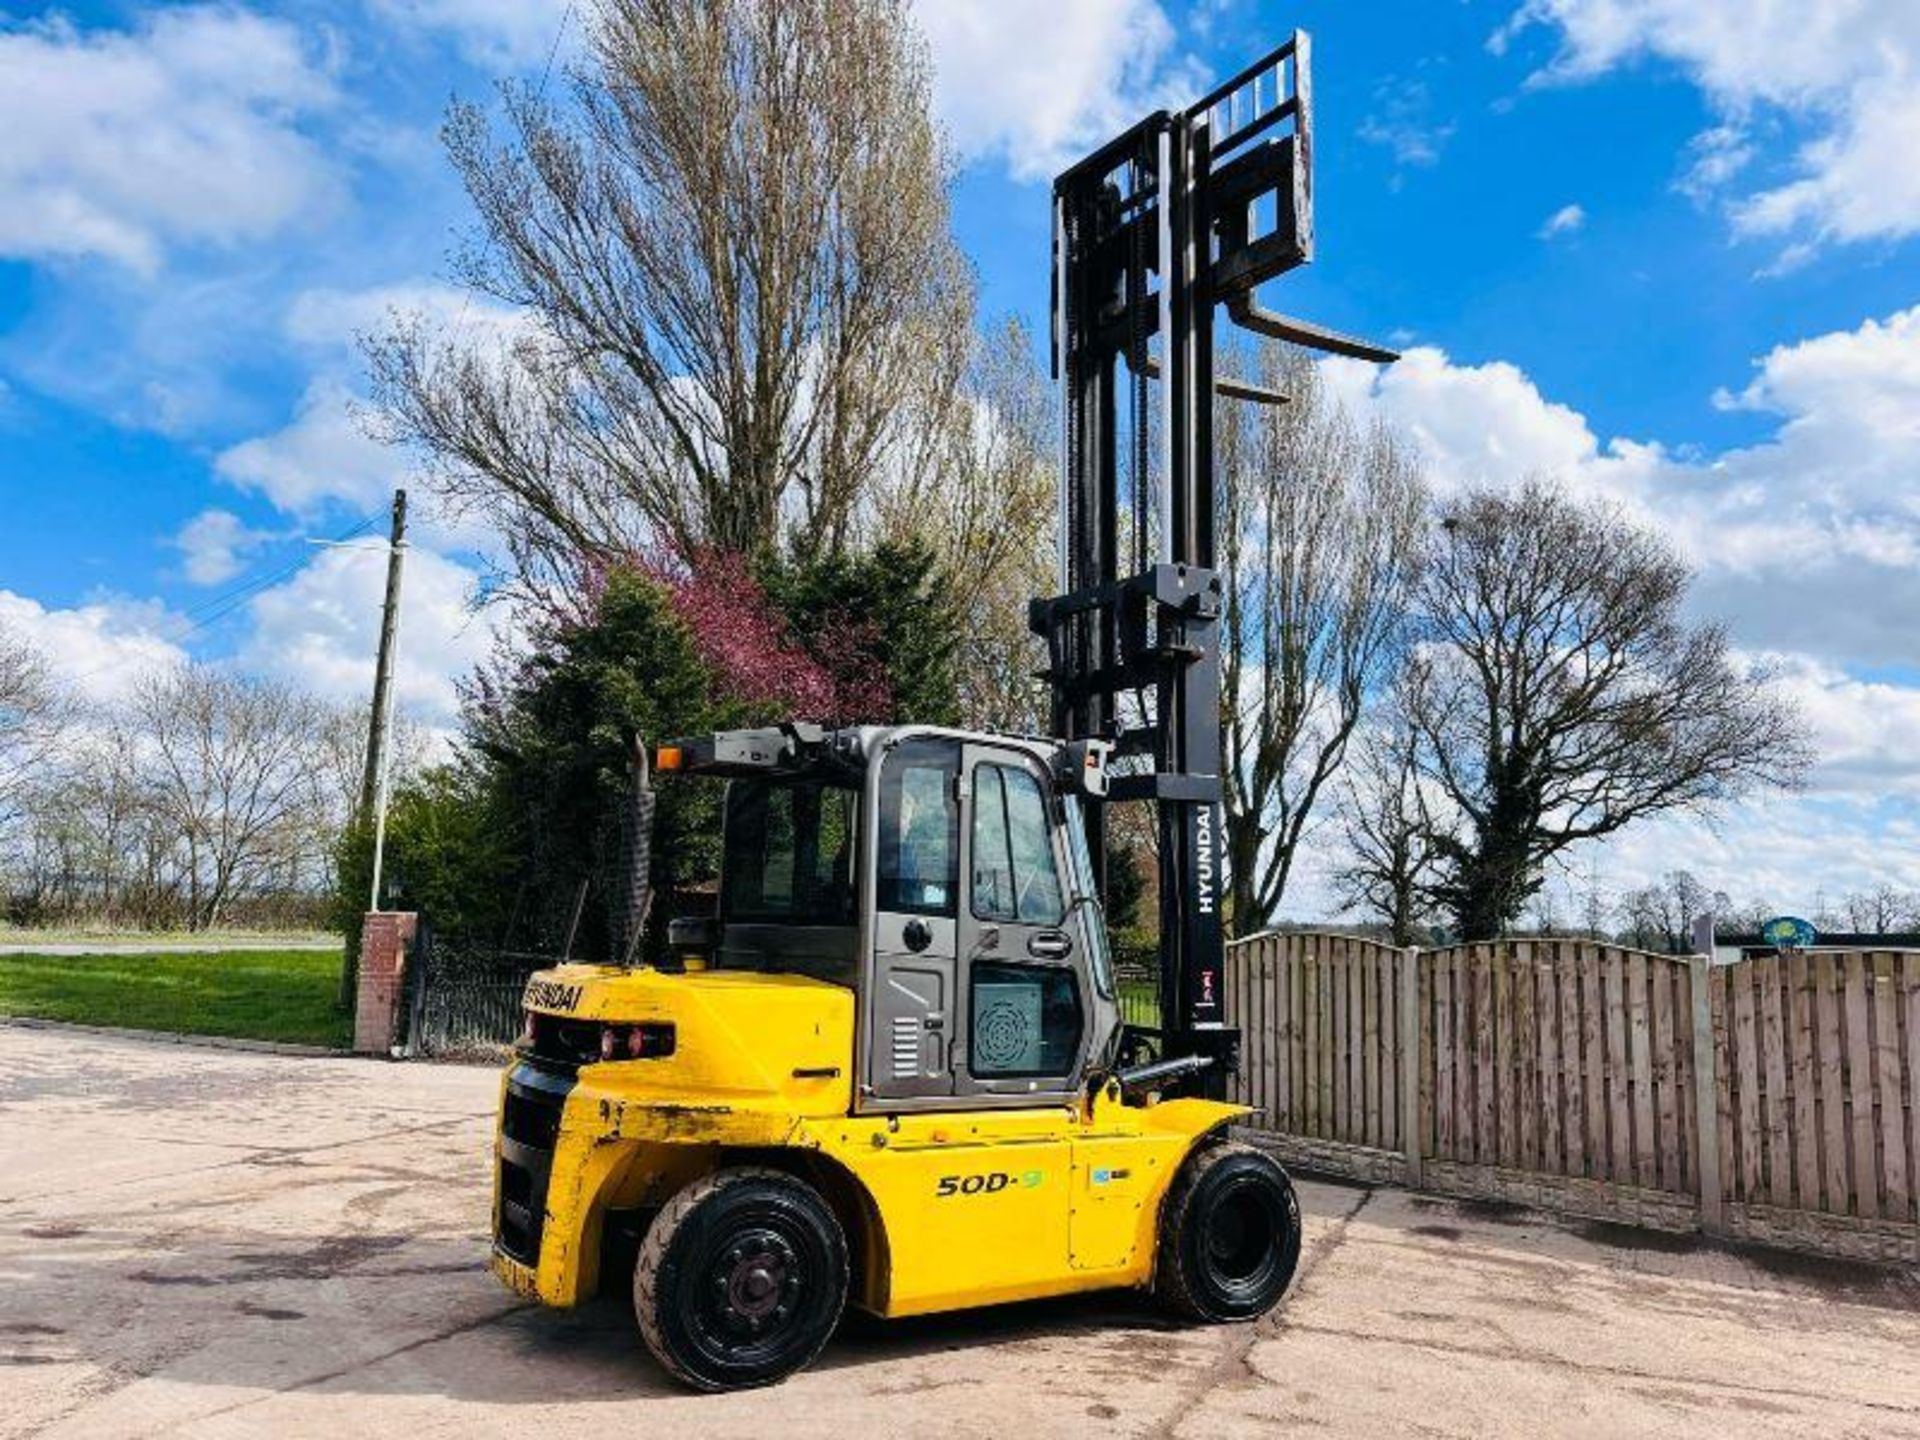 HYUNDAI 50D-9 DIESEL FORKLIFT *YEAR 2016, 5 TON LIFT* C/W SIDE SHIFT - Image 2 of 19